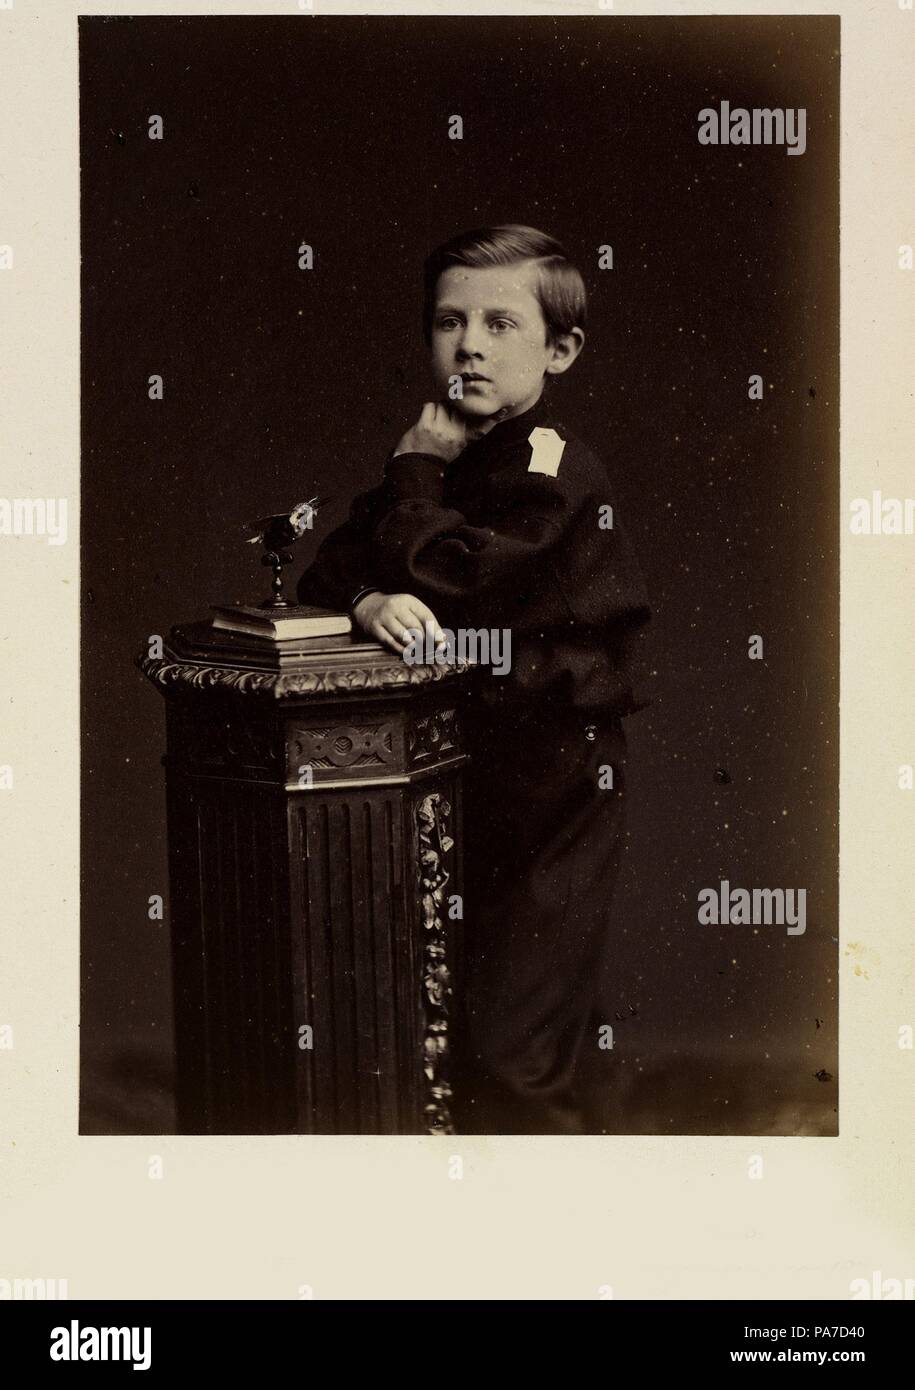 Portrait of Grand Duke Vyacheslav Constantinovich of Russia (1862-1879). Museum: Russian State Film and Photo Archive, Krasnogorsk. Stock Photo